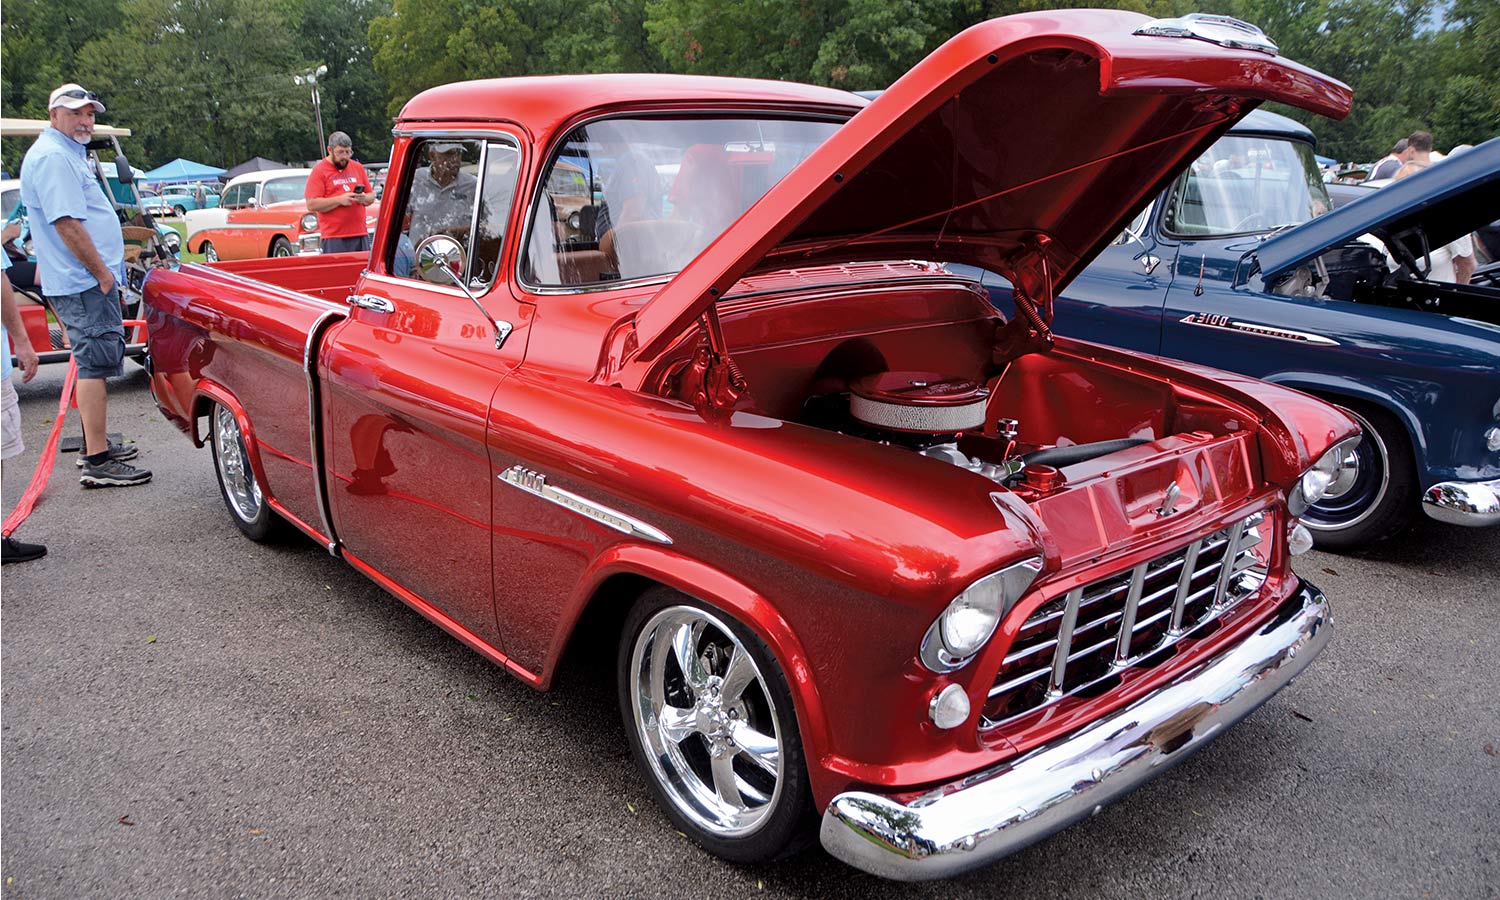 Mike Taylor's red ’55 Chevy Cameo pickup truck